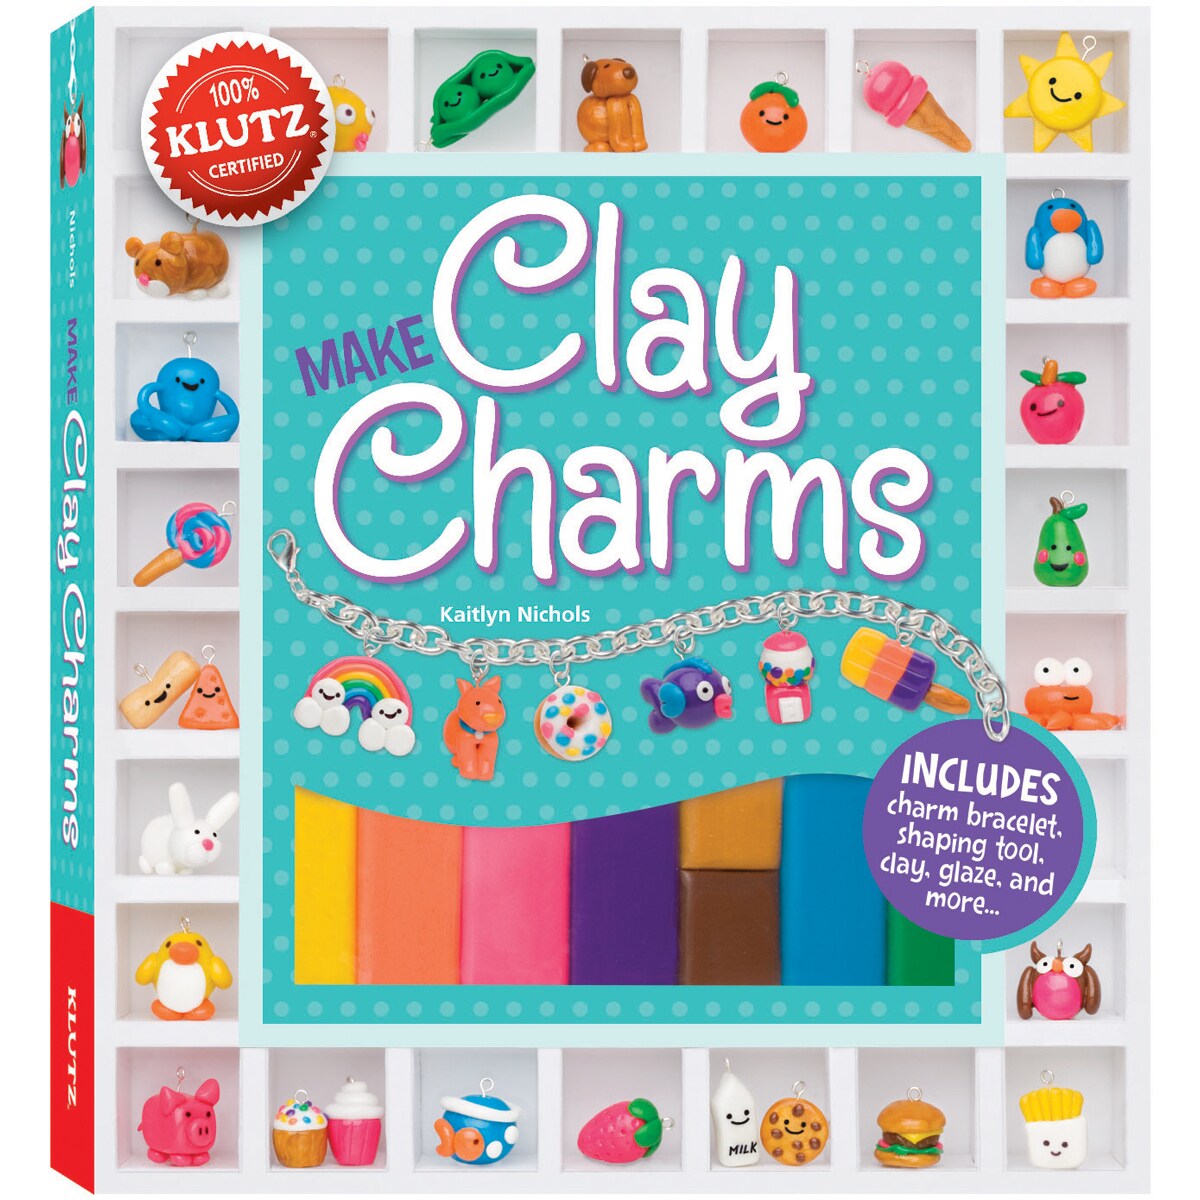 Klutz Make Clay Charms Book Kit-